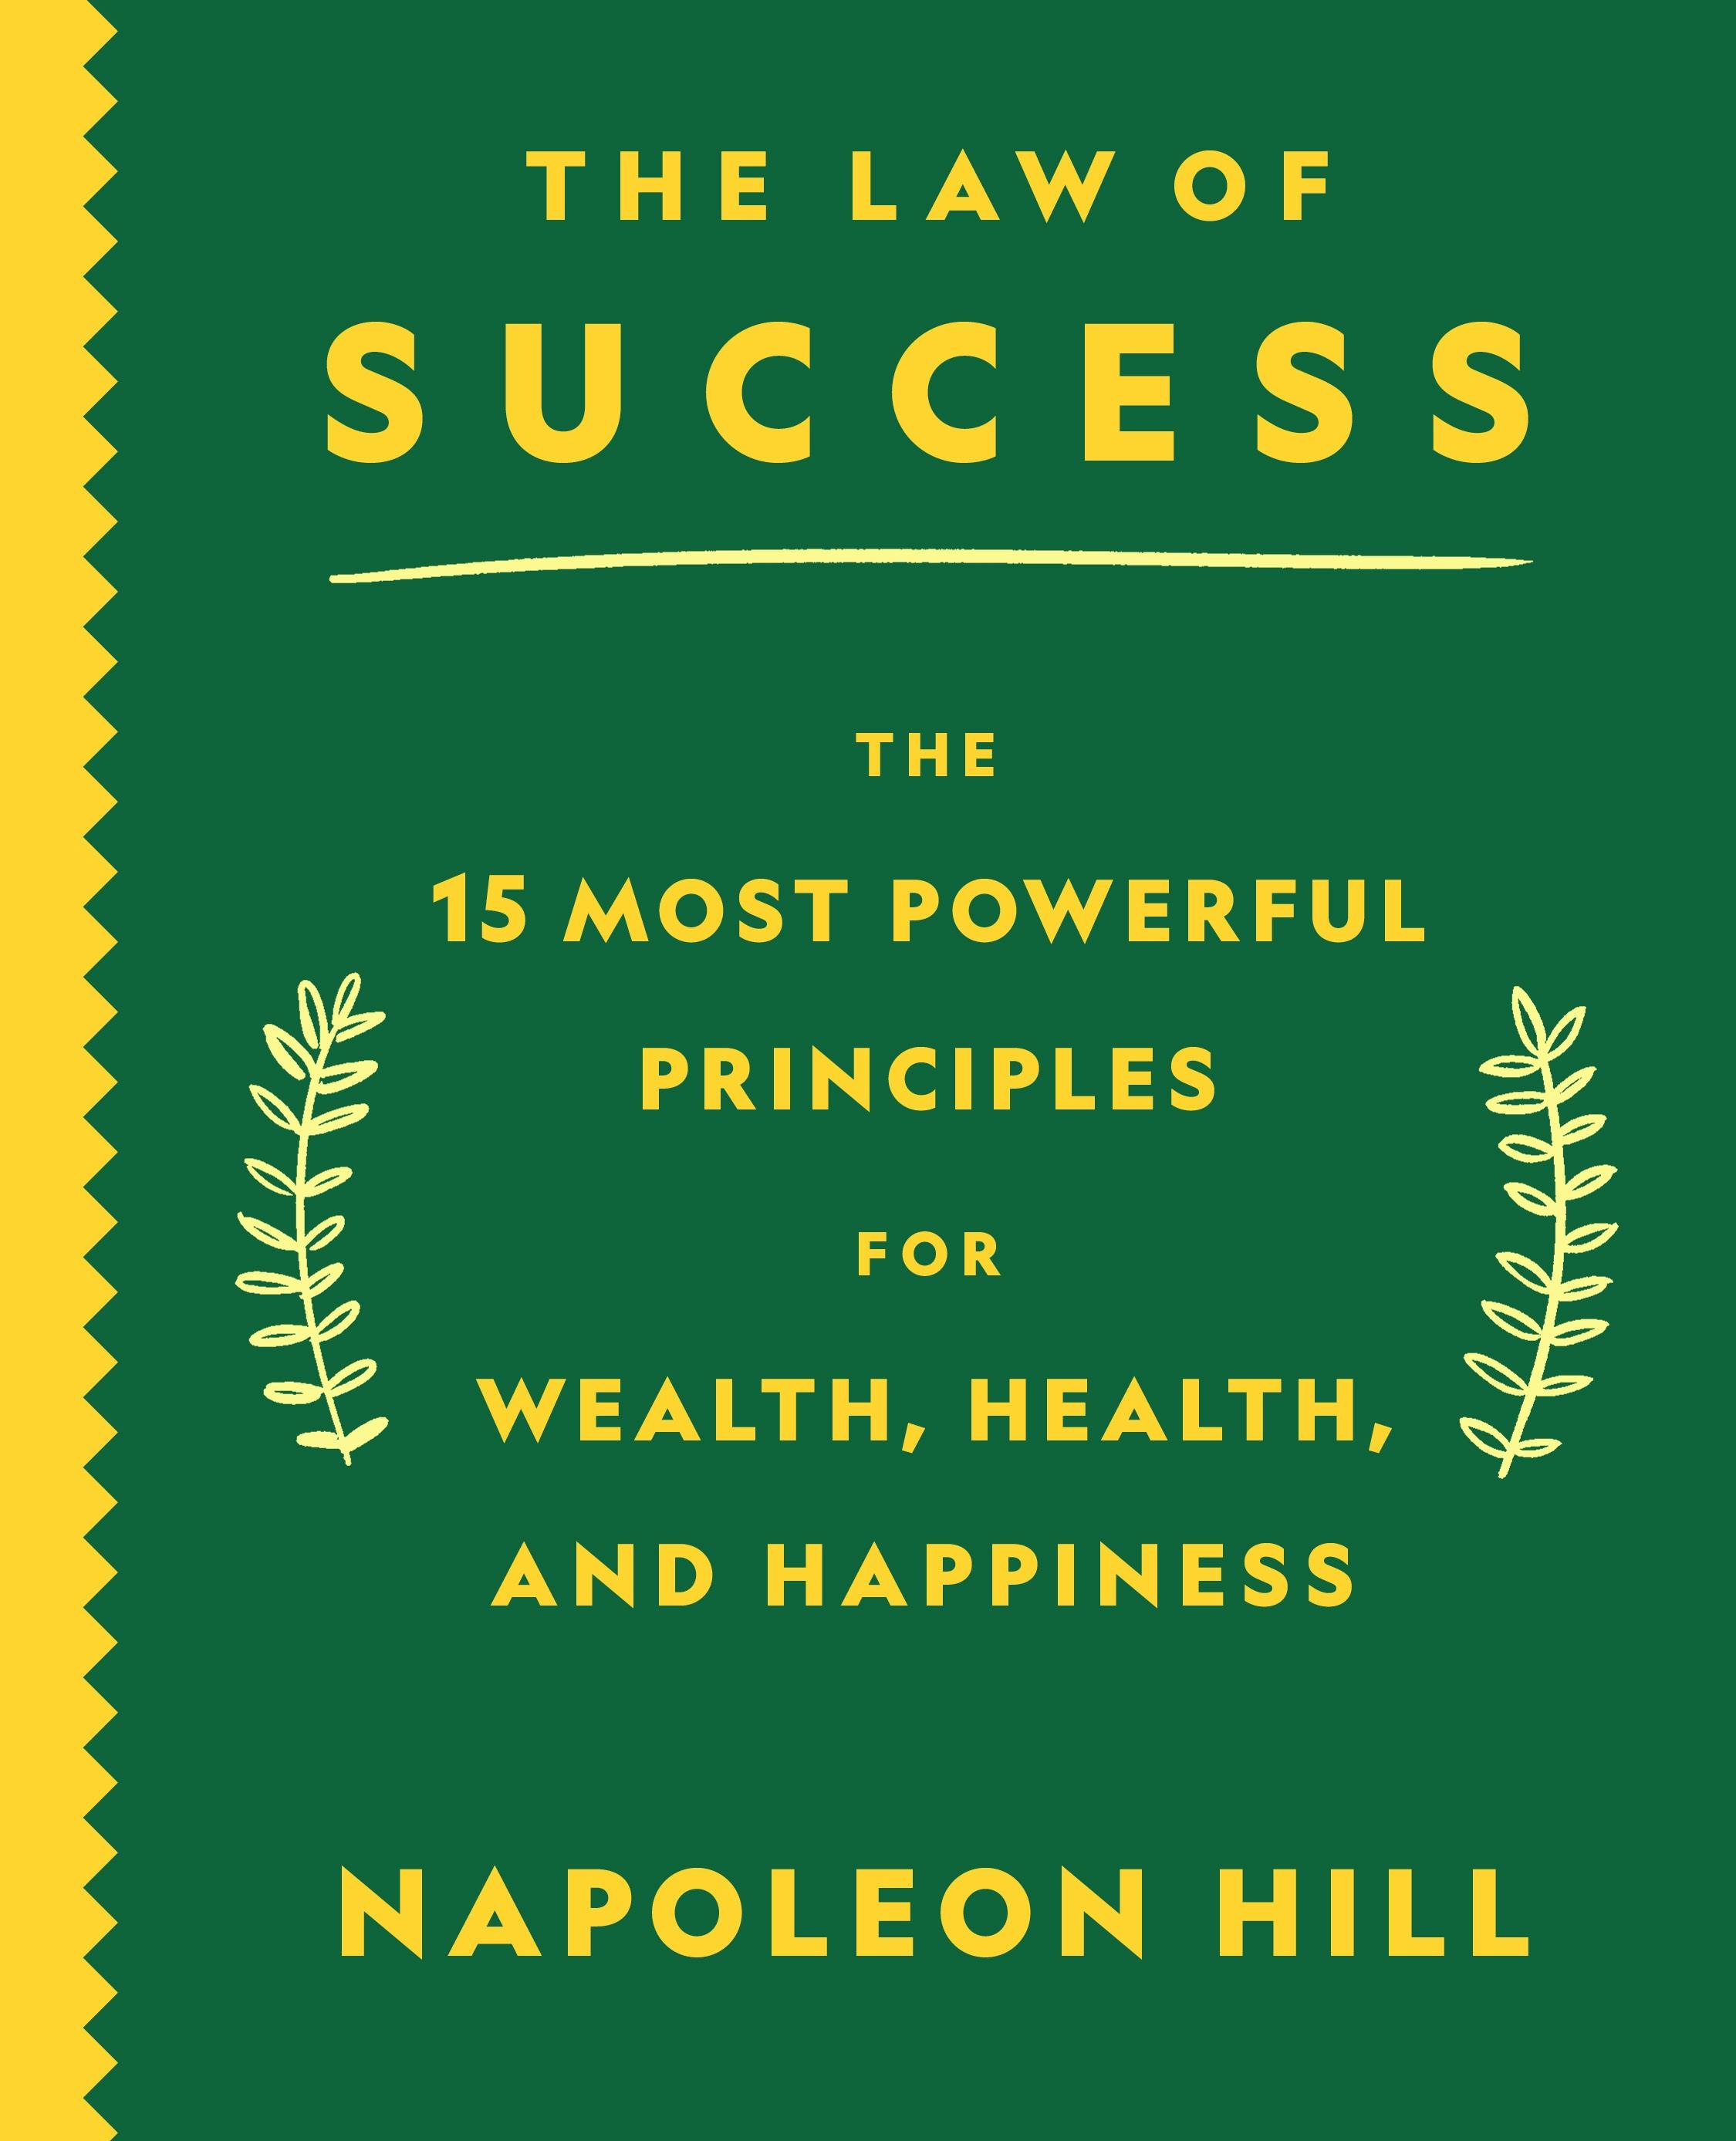 20 Things Napoleon Hill Said That Changed Millions of Lives